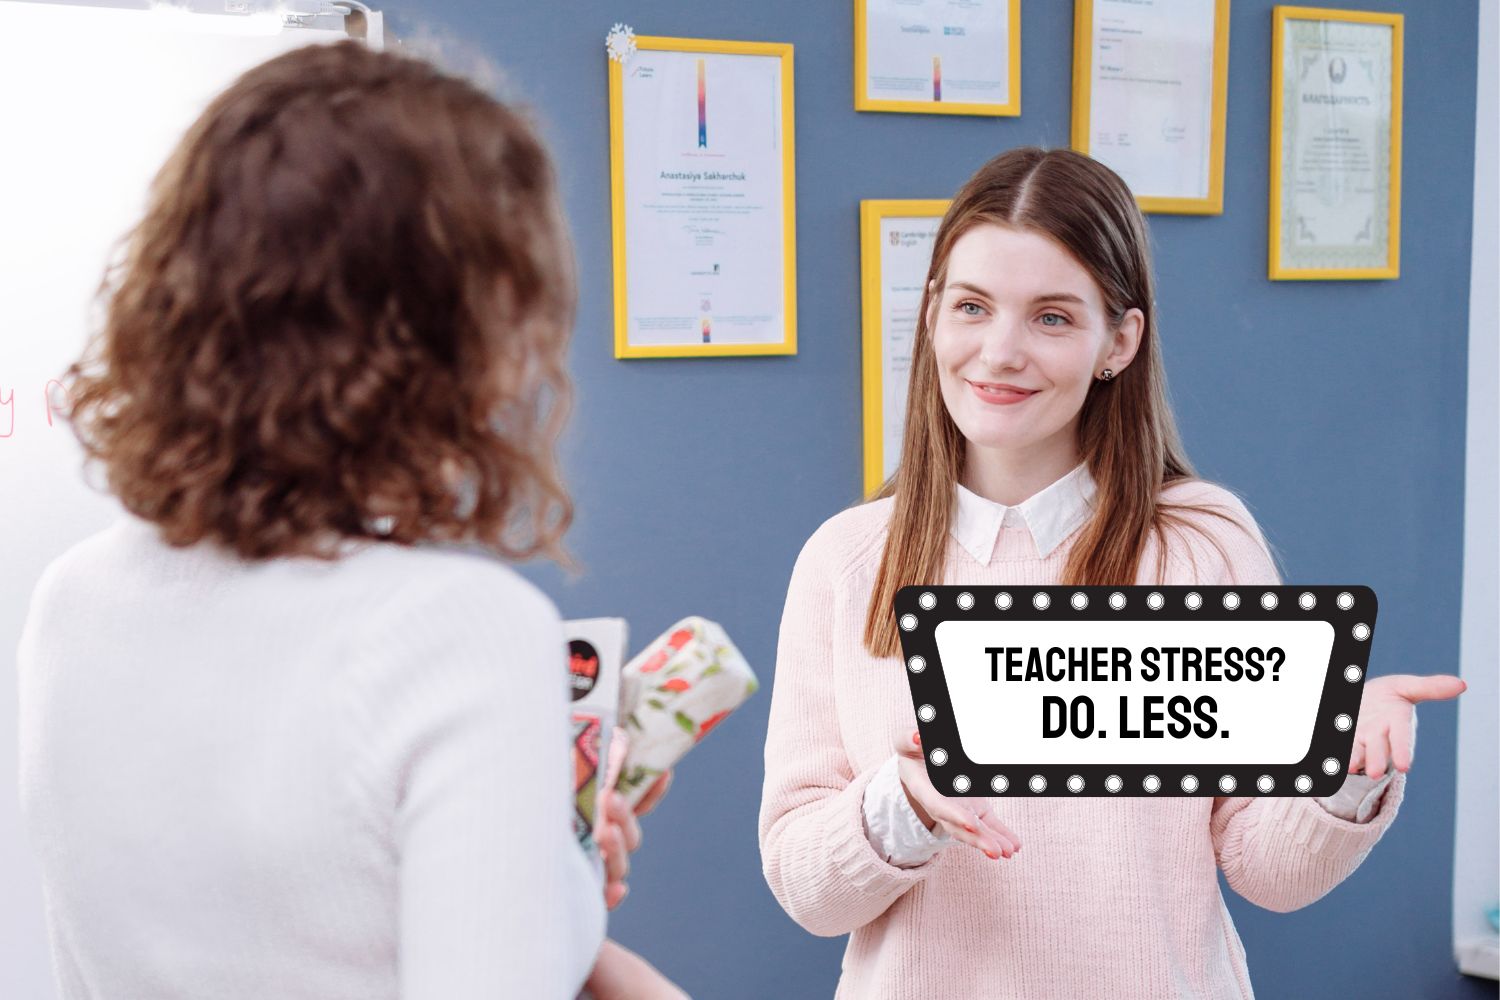 Woman standing in front of a sign that says, "Teacher stress? Do less."